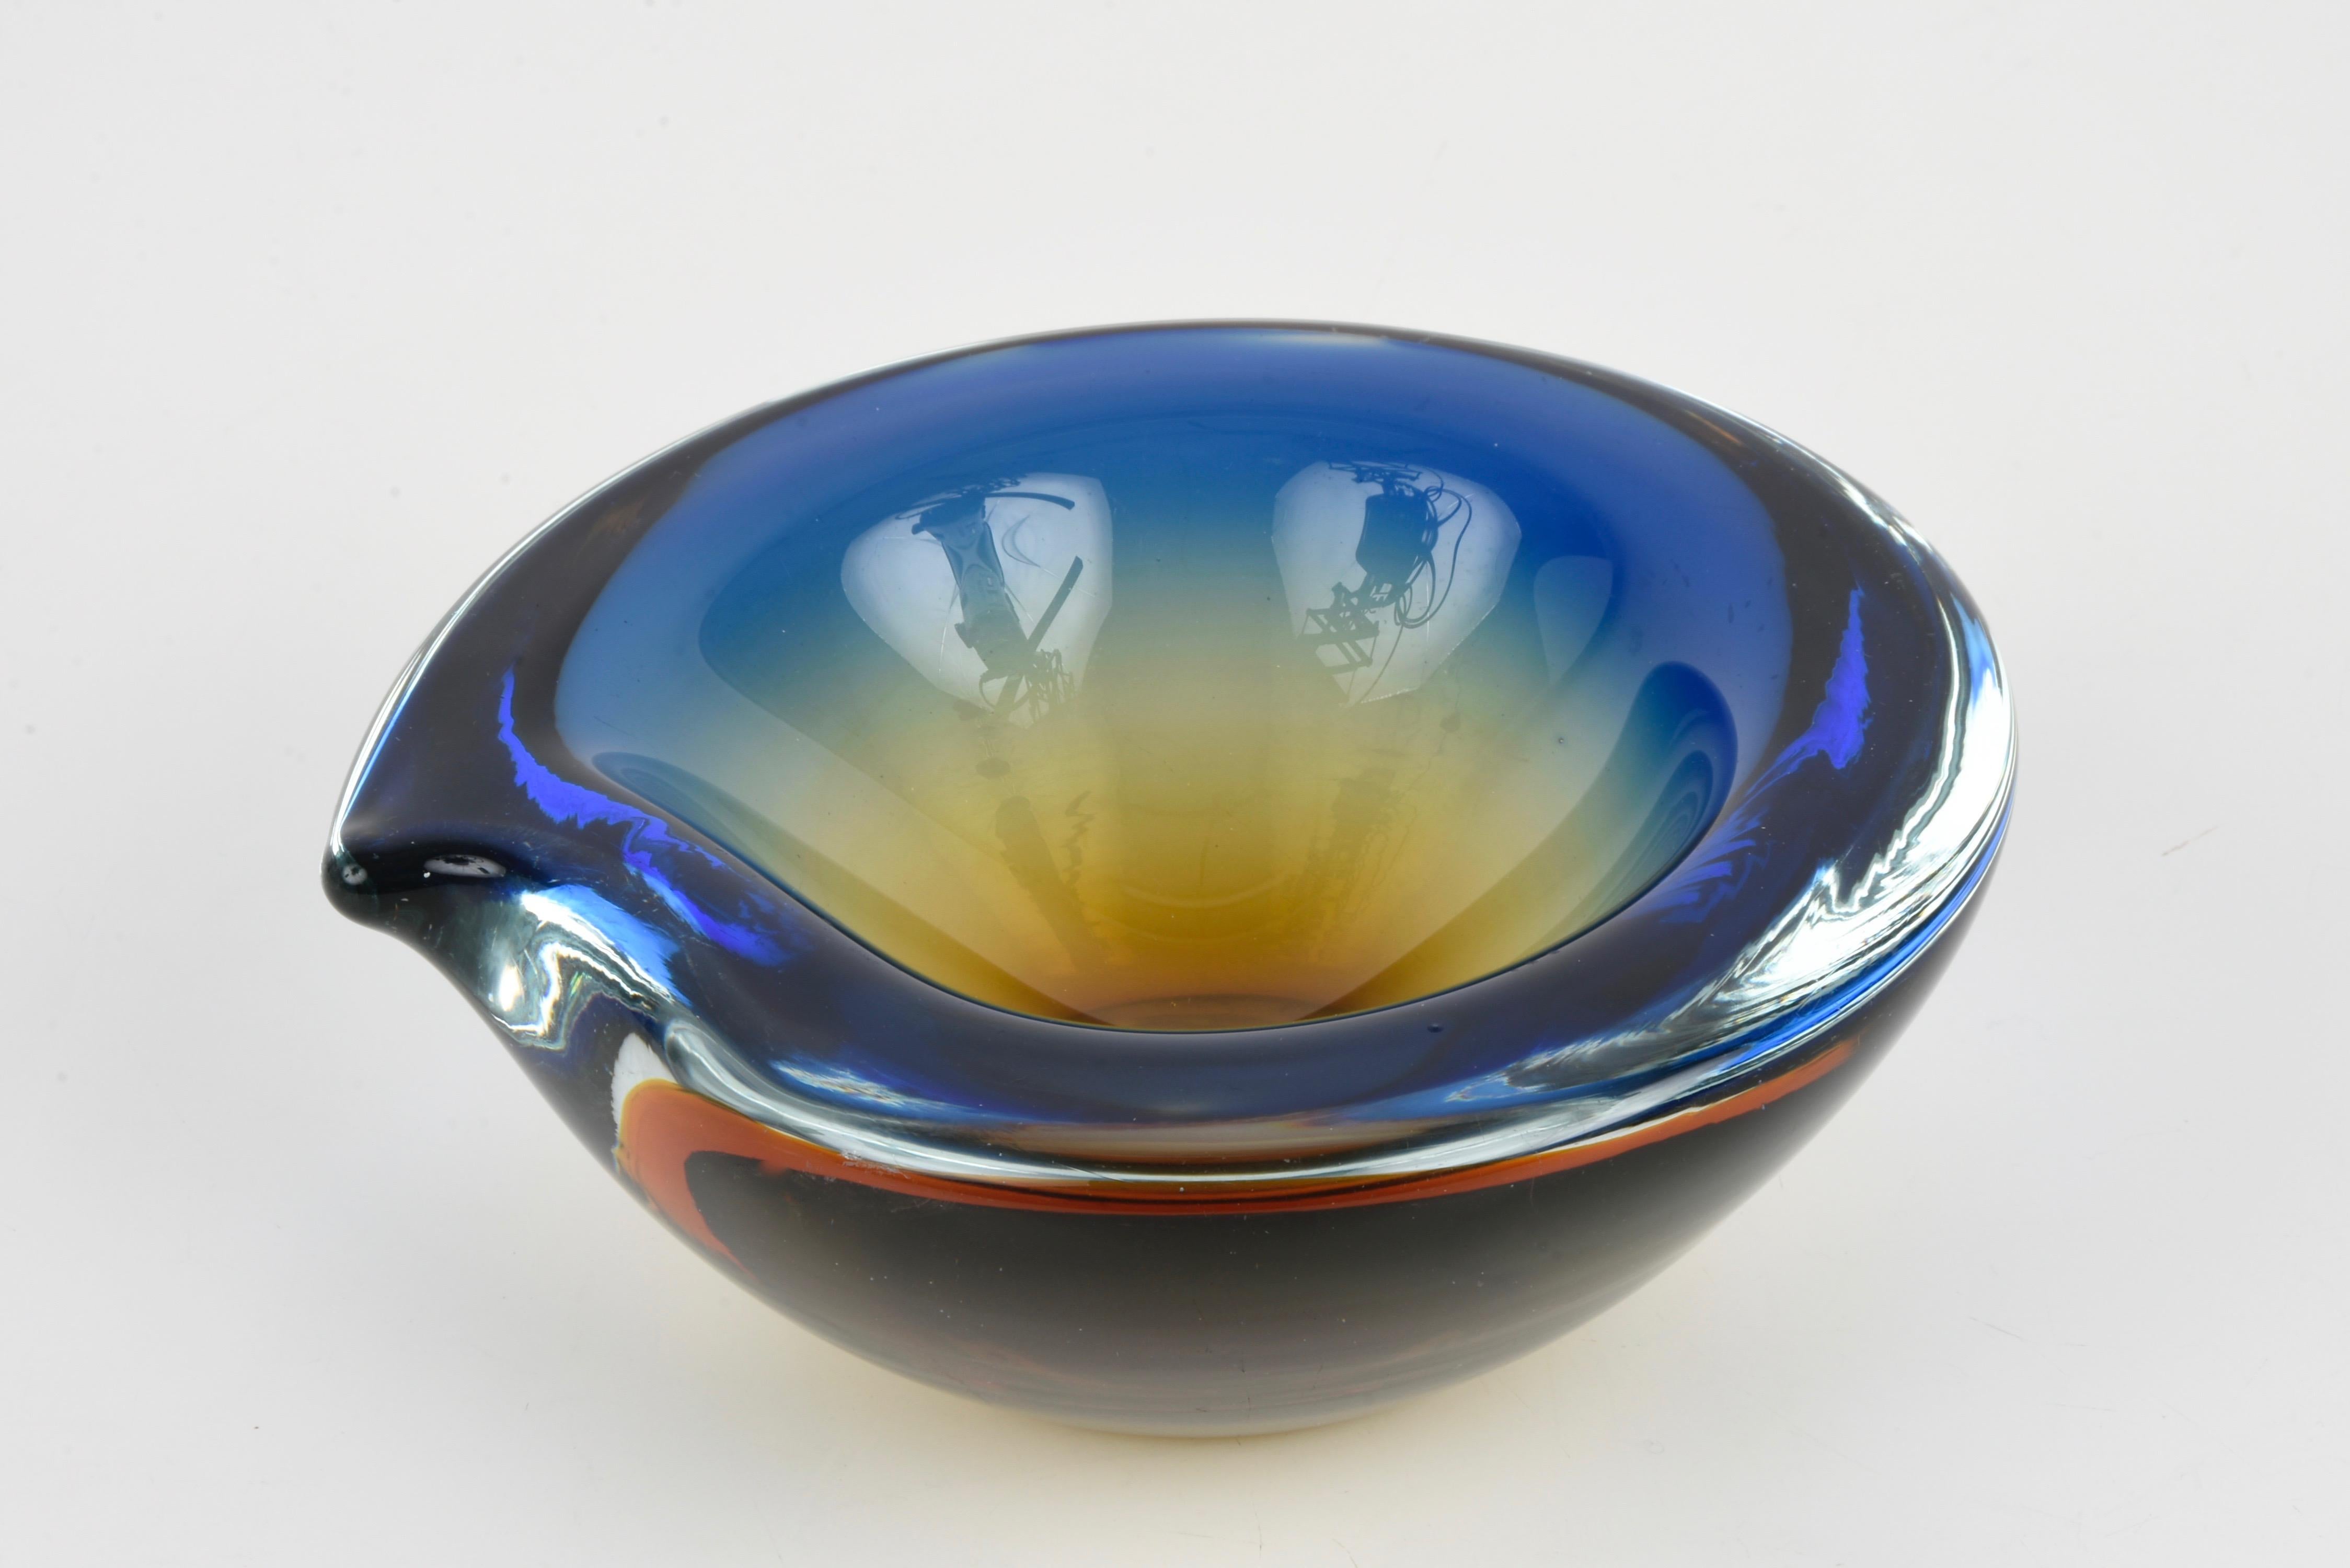 Magnificent bowl or ashtray in Murano glass blue with amber shades. This fantastic item was produced in Italy in the 1960s. 
This wonderful piece is a perfect blend of sinuous and sexy lines and colors of Murano glass thanks to the mastery of the